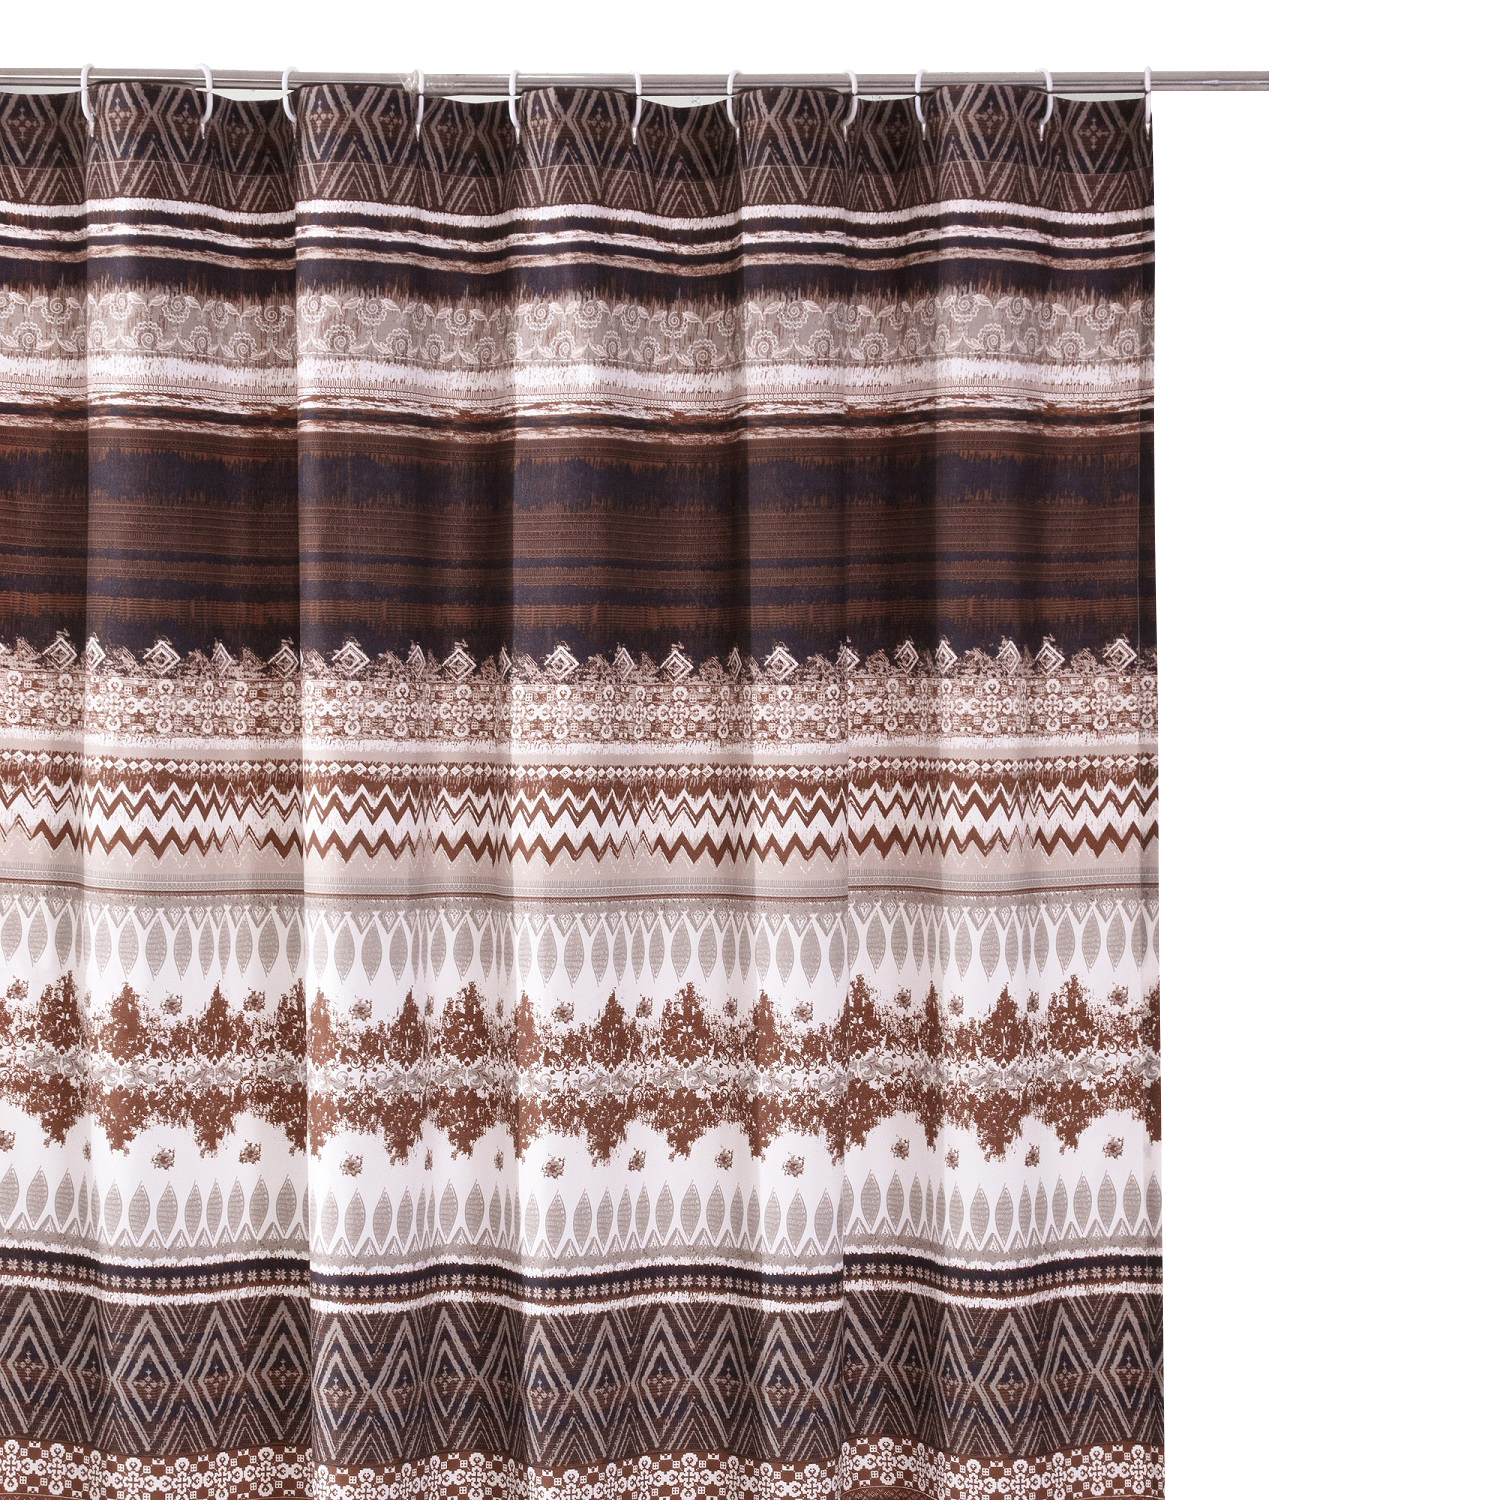 Roca 72 Inch Shower Curtain, Coffee Brown Striped Printing, Button Holes